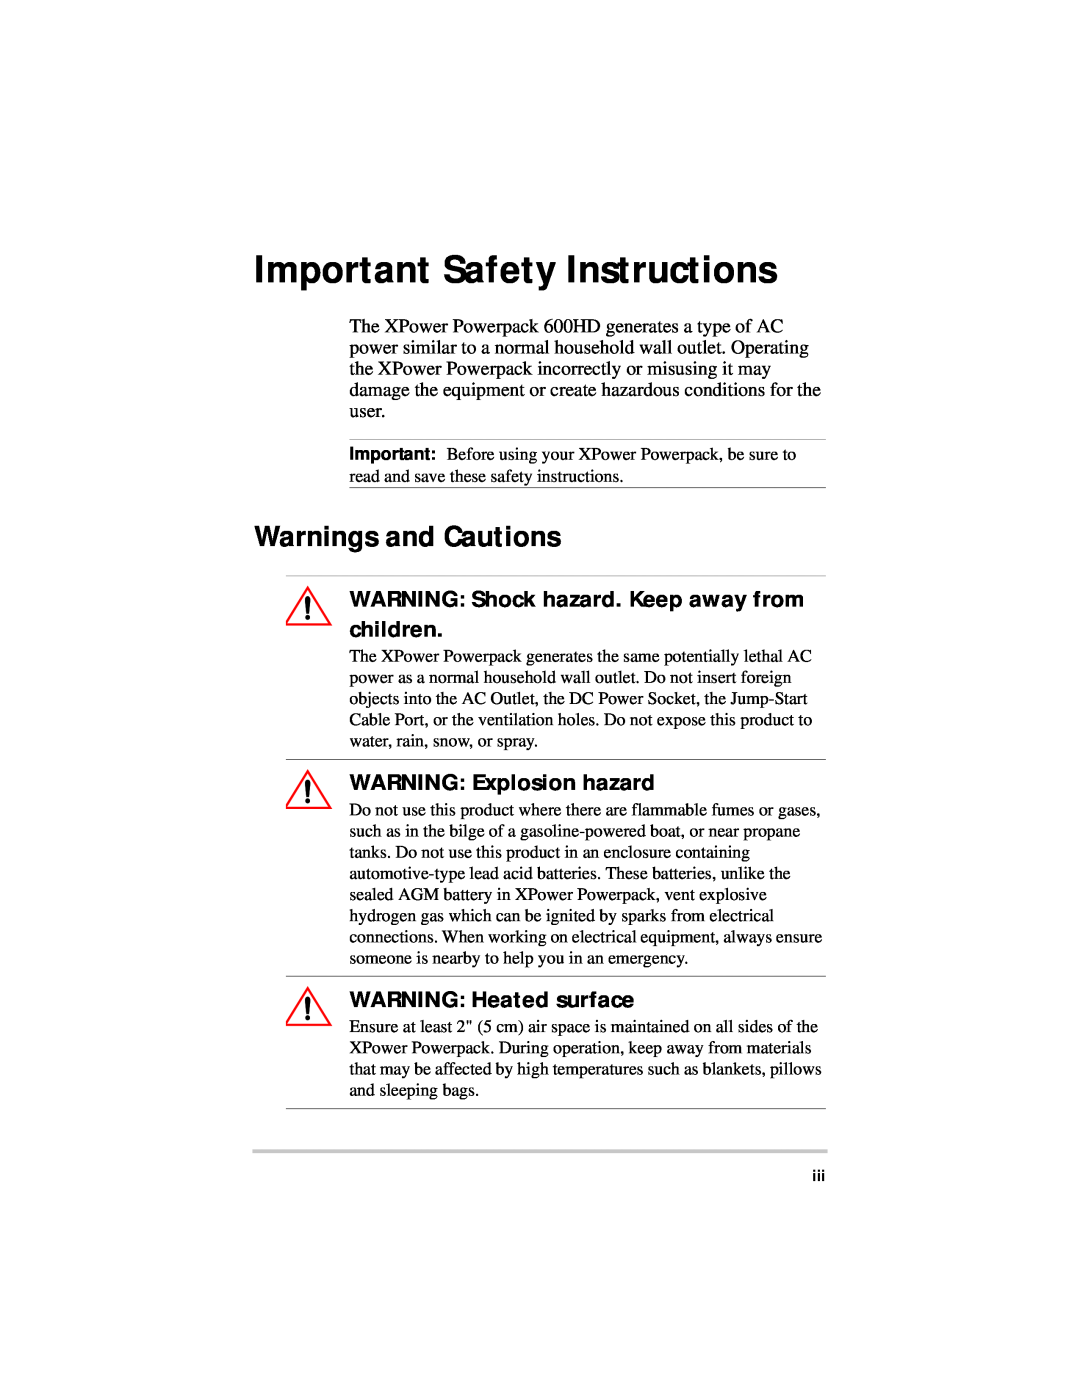 Xantrex Technology 600HD manual Important Safety Instructions, Warnings and Cautions, WARNING Explosion hazard 